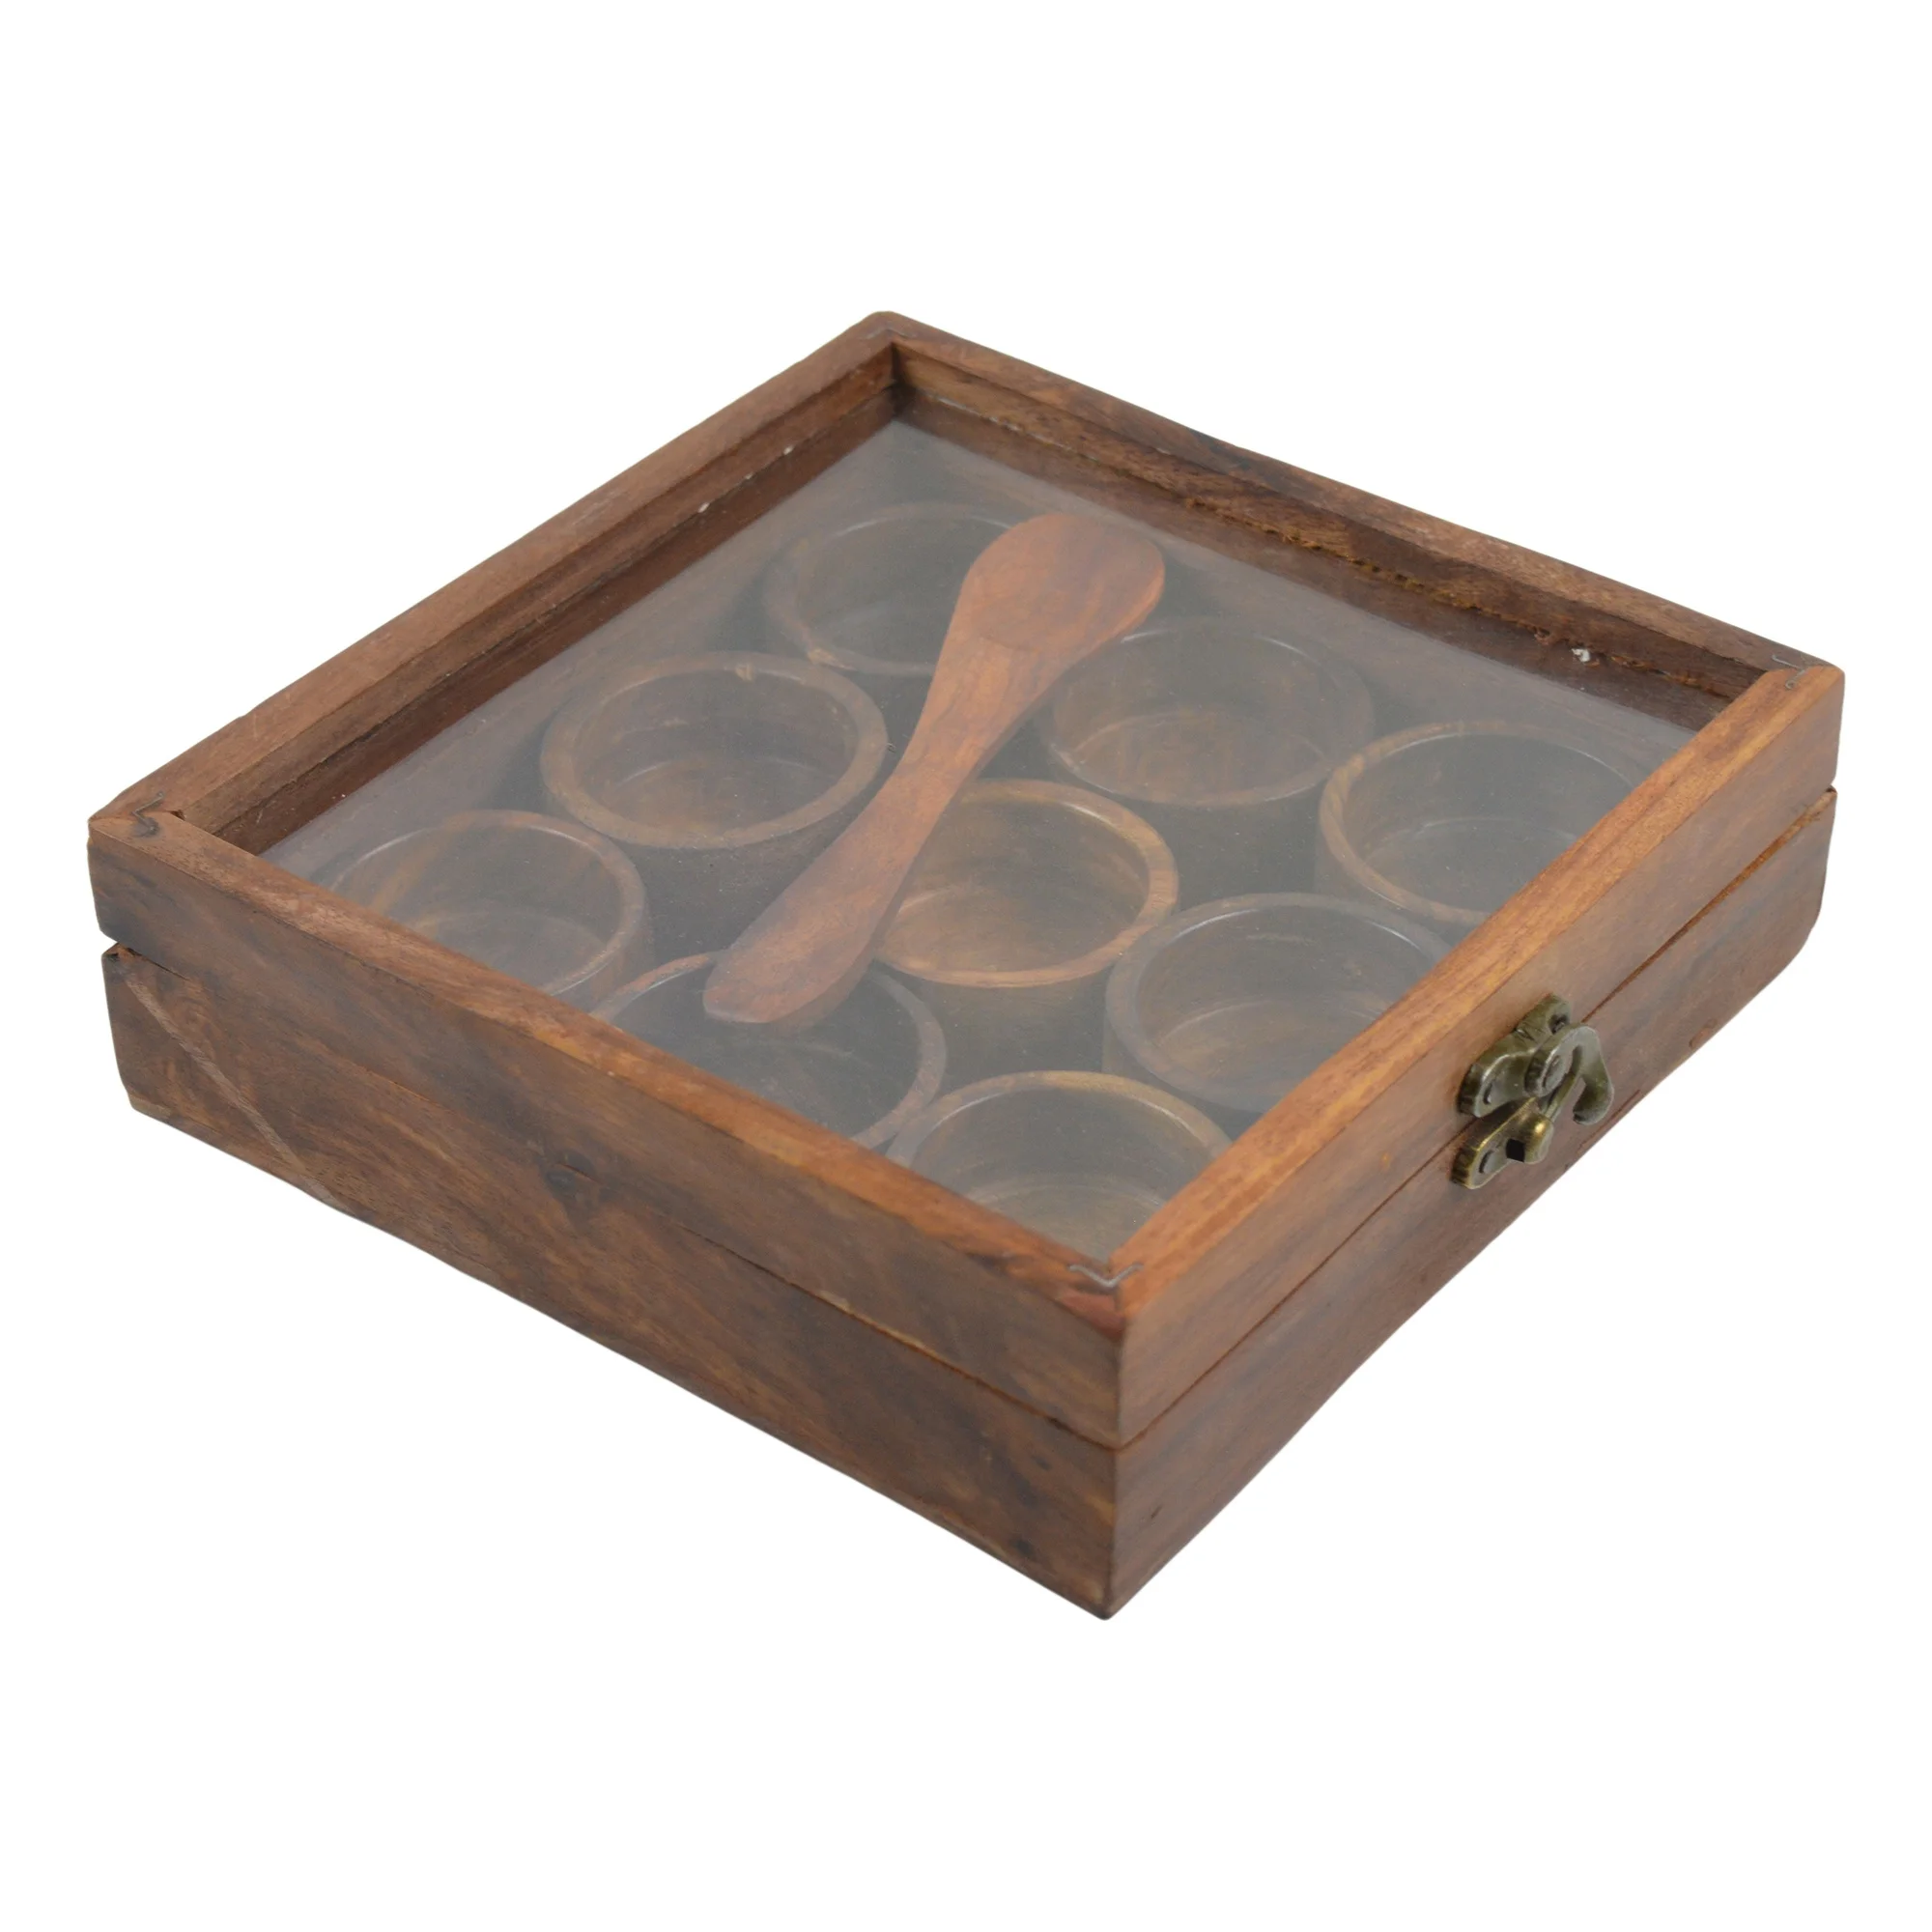 Masala Box Natural Wooden With Nine Cups Kitchenware Spicy Food Design Wooden Box With Wooden Spoon